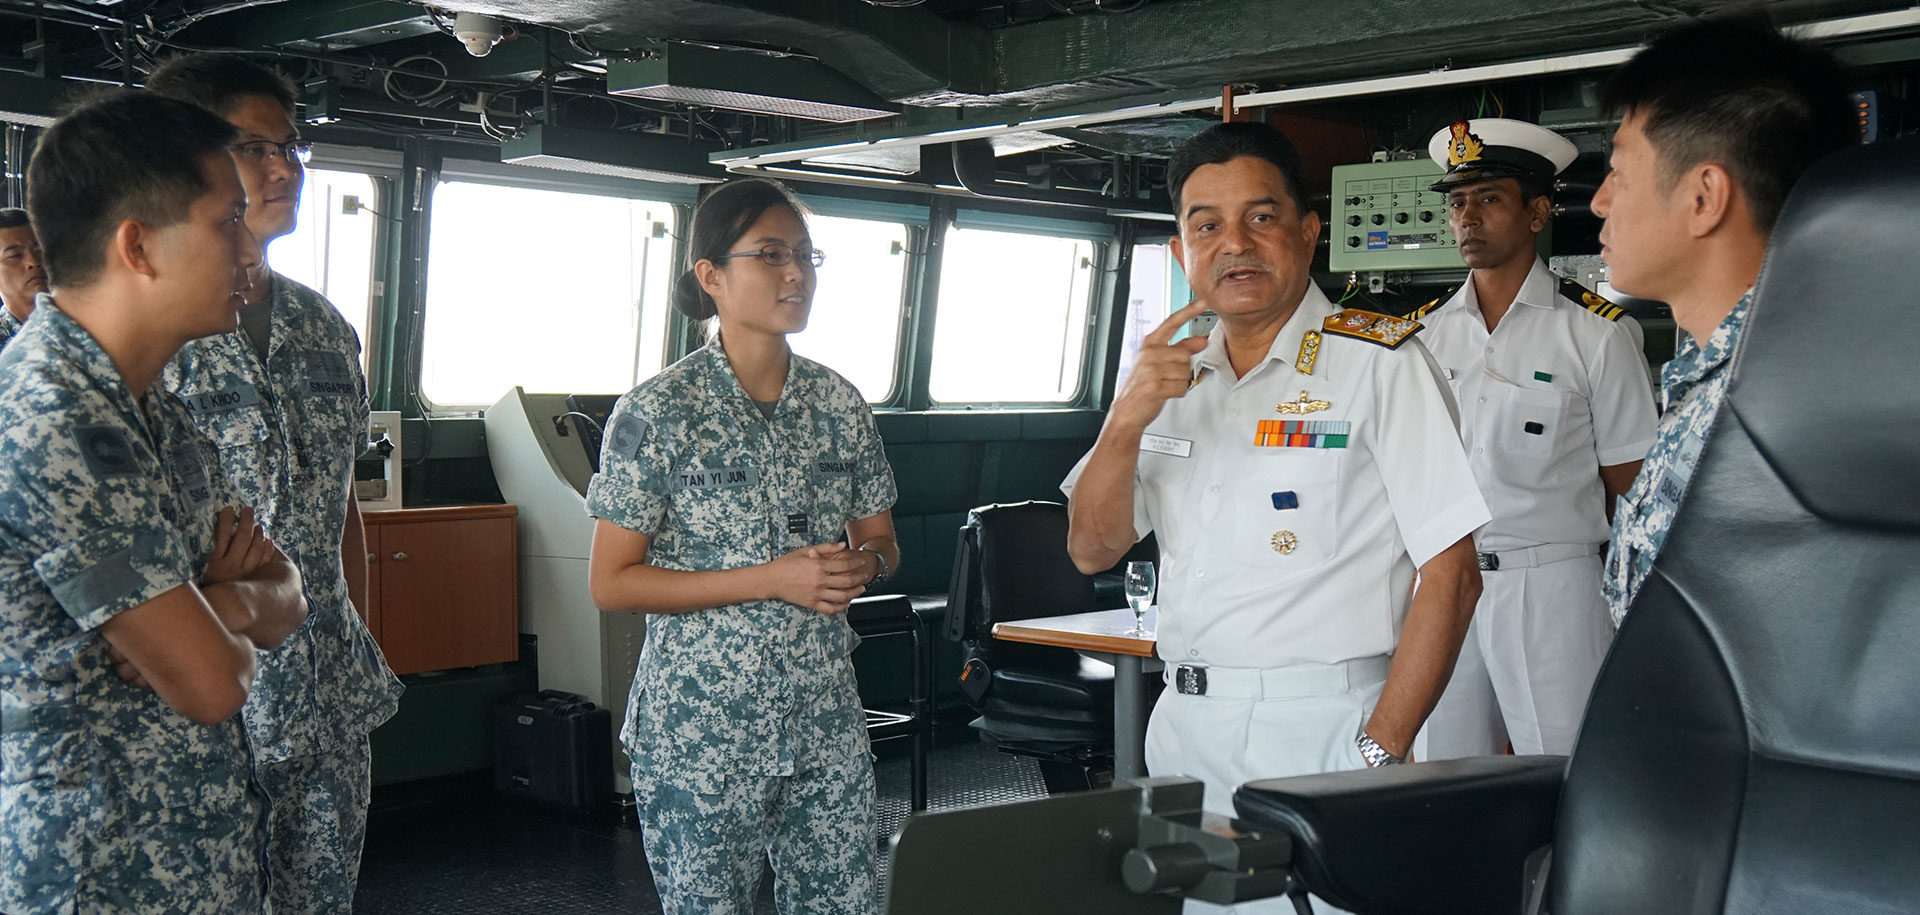 VADM Bisht visiting the RSN's RSS Formidable during SIMBEX